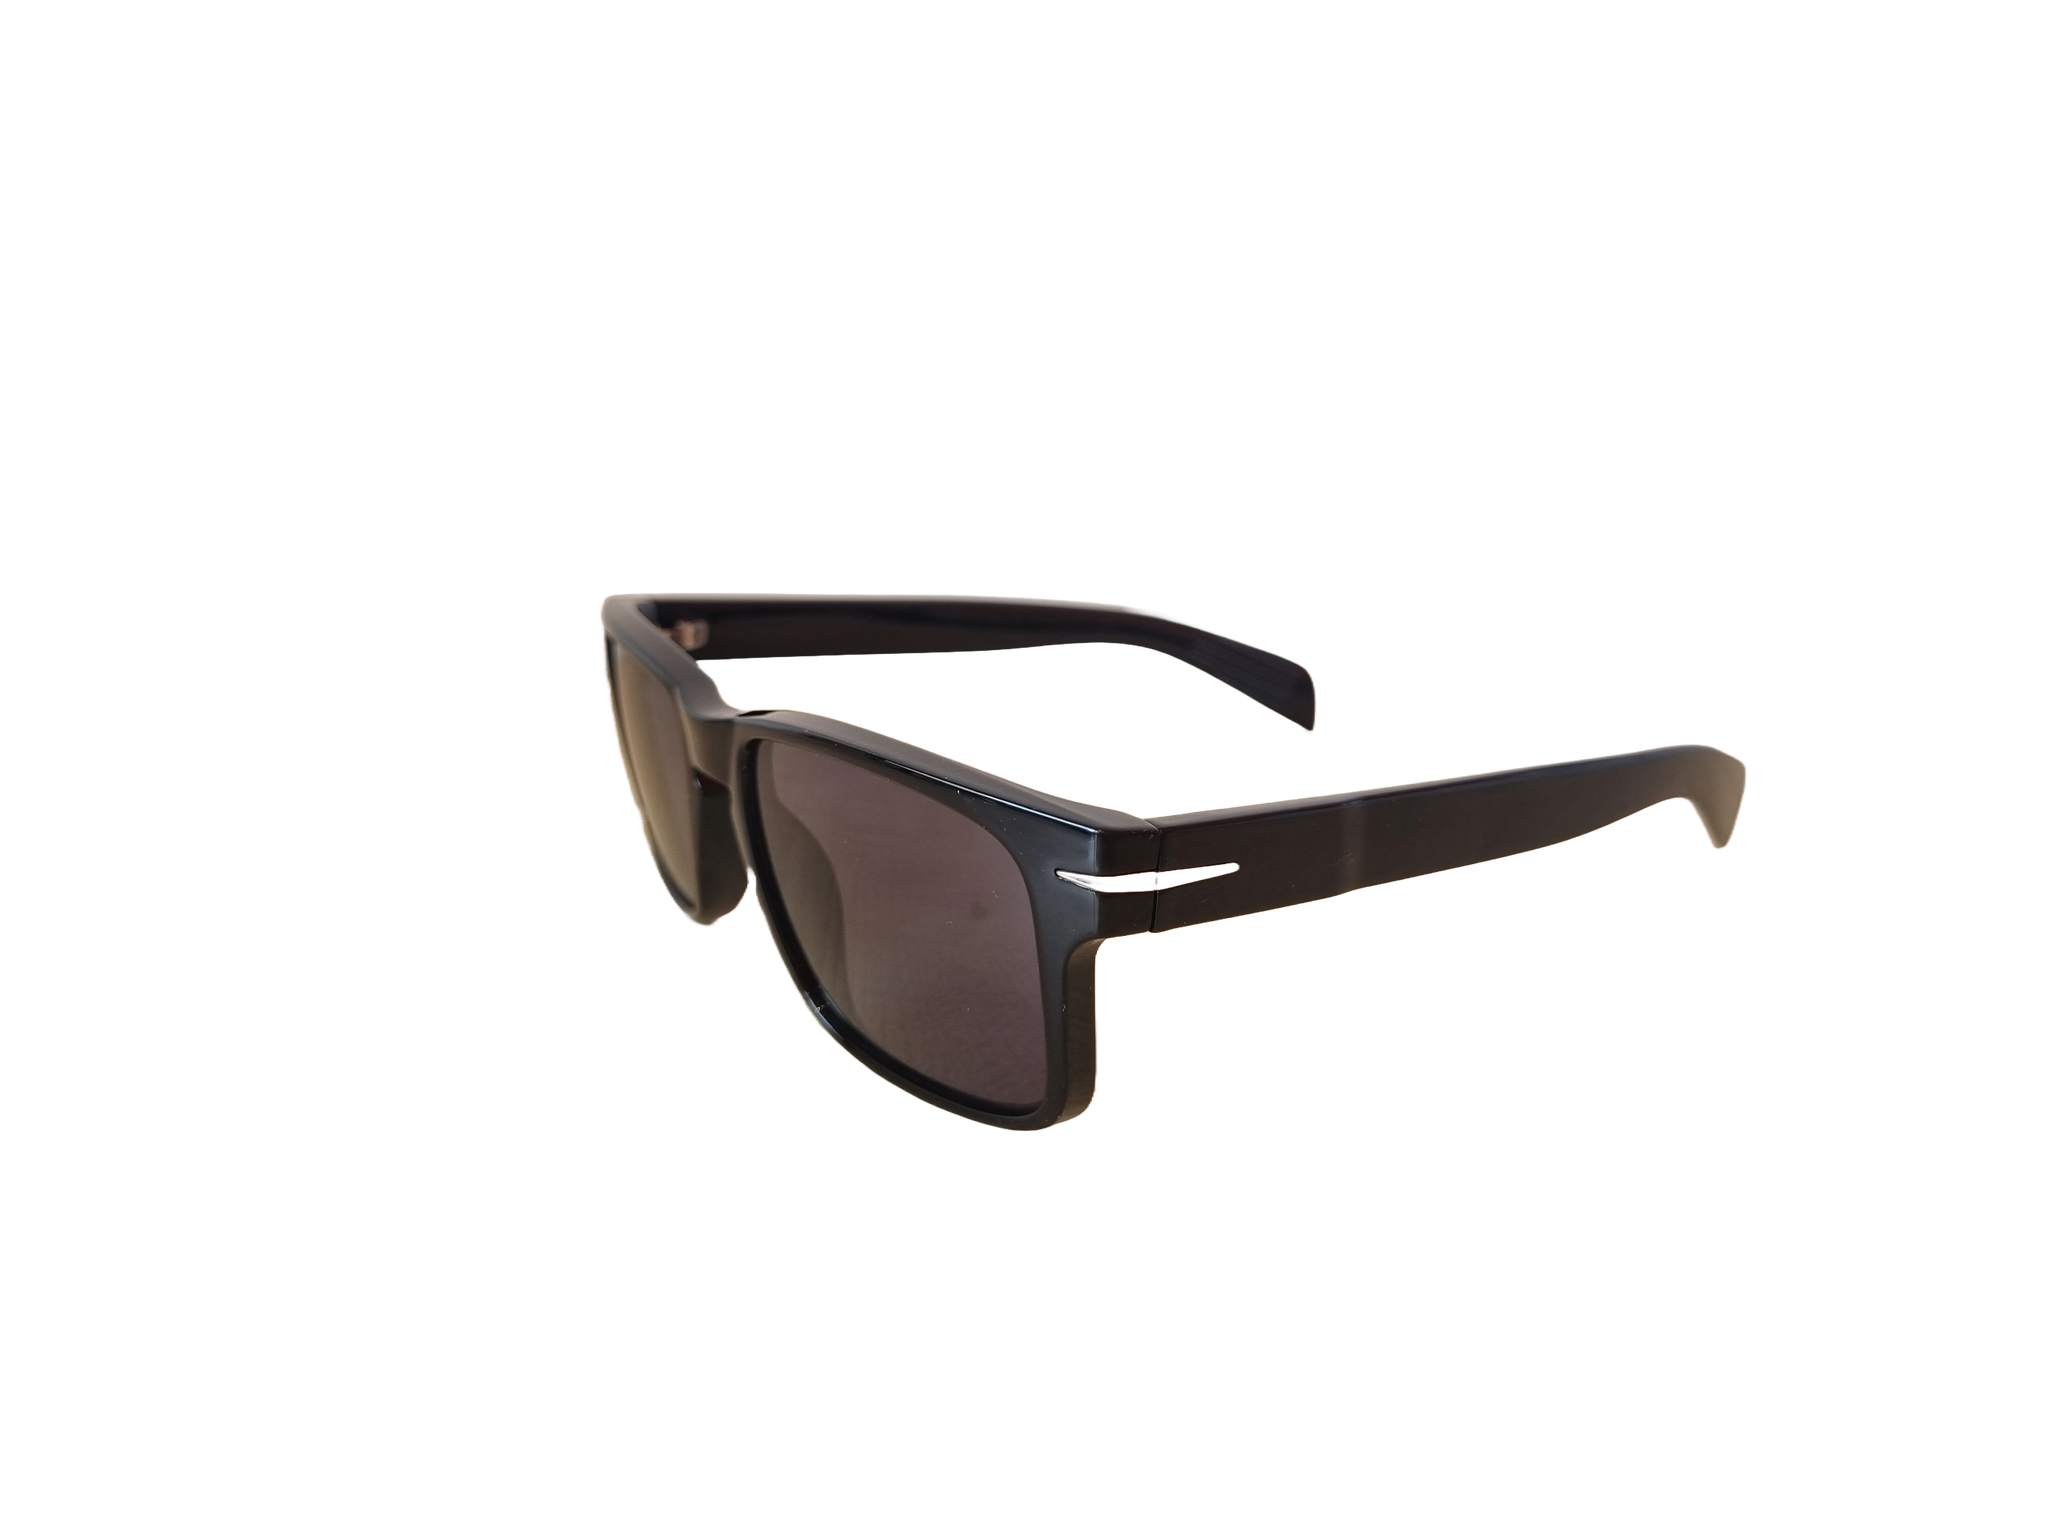 Boardwalk Black Sunglasses - free with coupon!